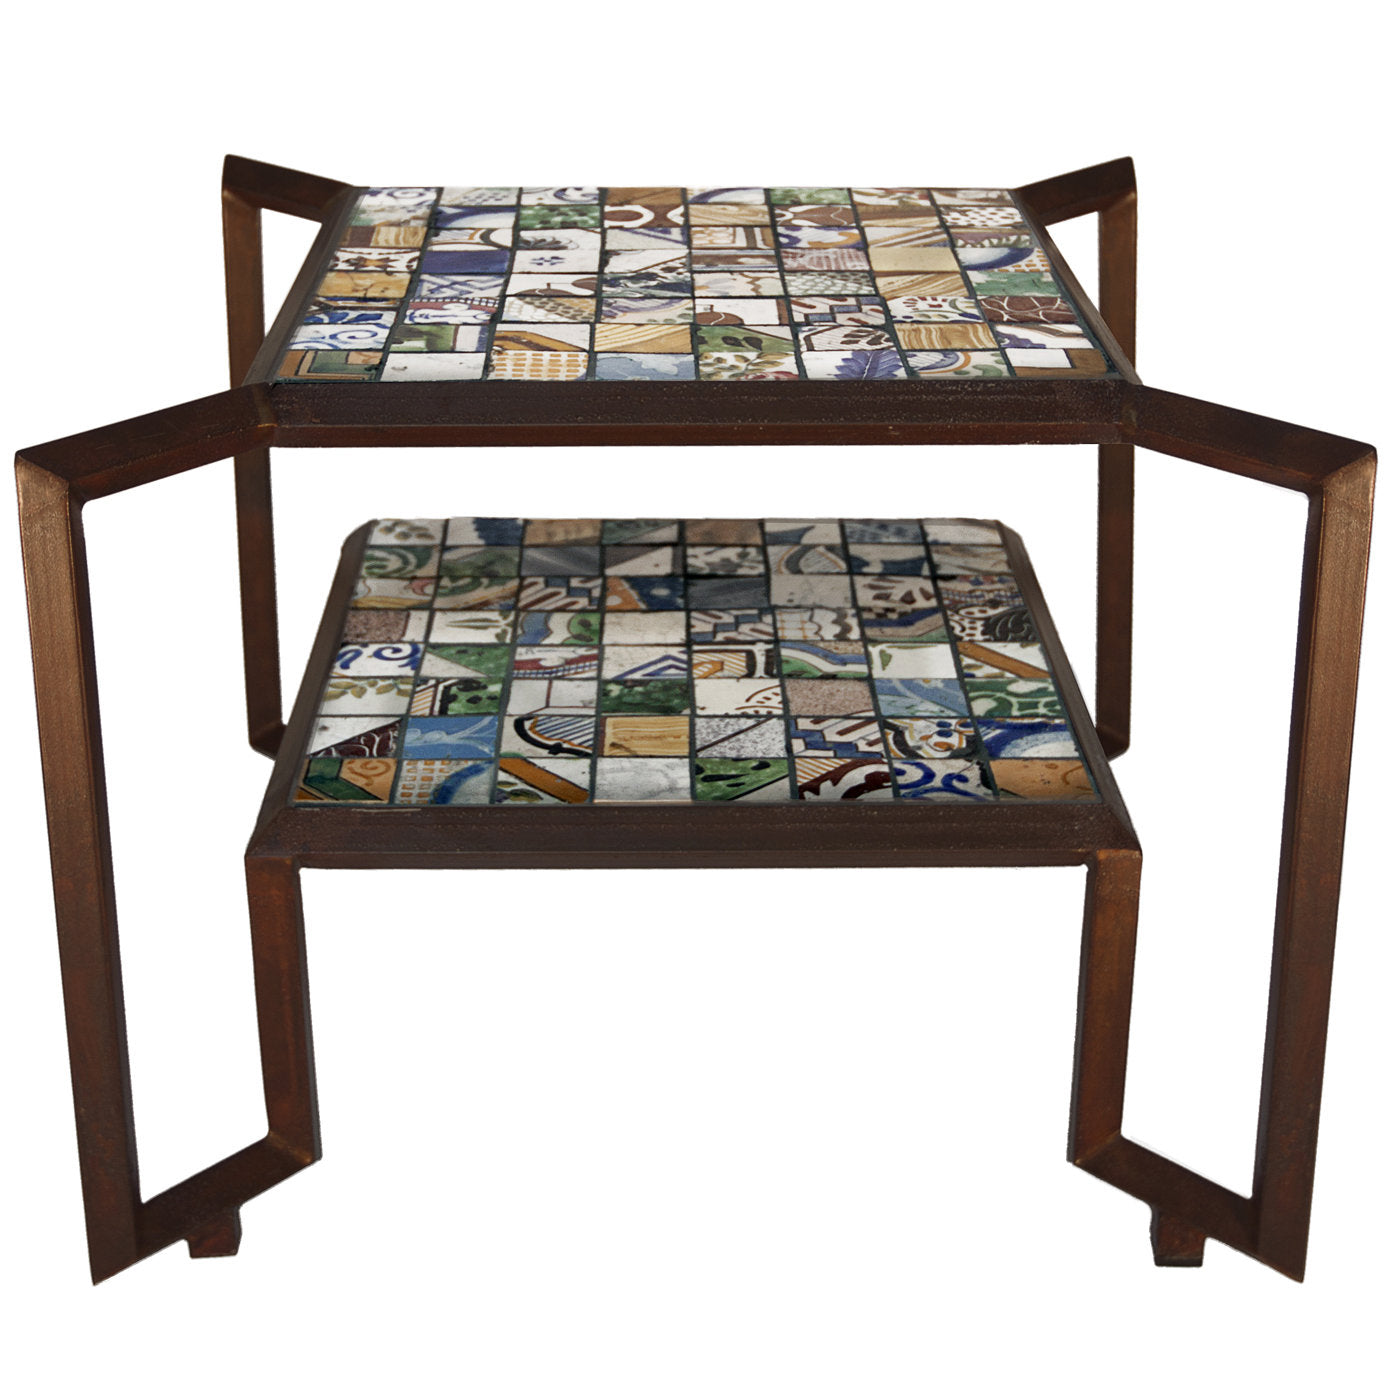 Spider Mosaic Tile Table - Alternative view 3